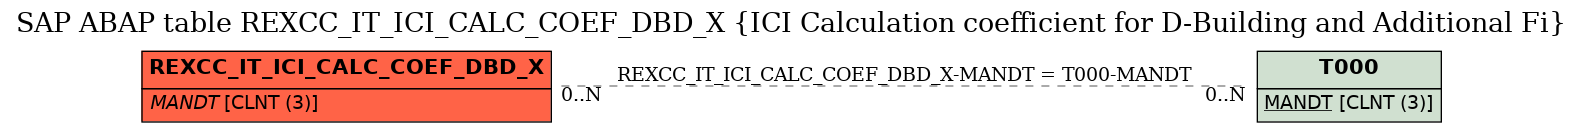 E-R Diagram for table REXCC_IT_ICI_CALC_COEF_DBD_X (ICI Calculation coefficient for D-Building and Additional Fi)